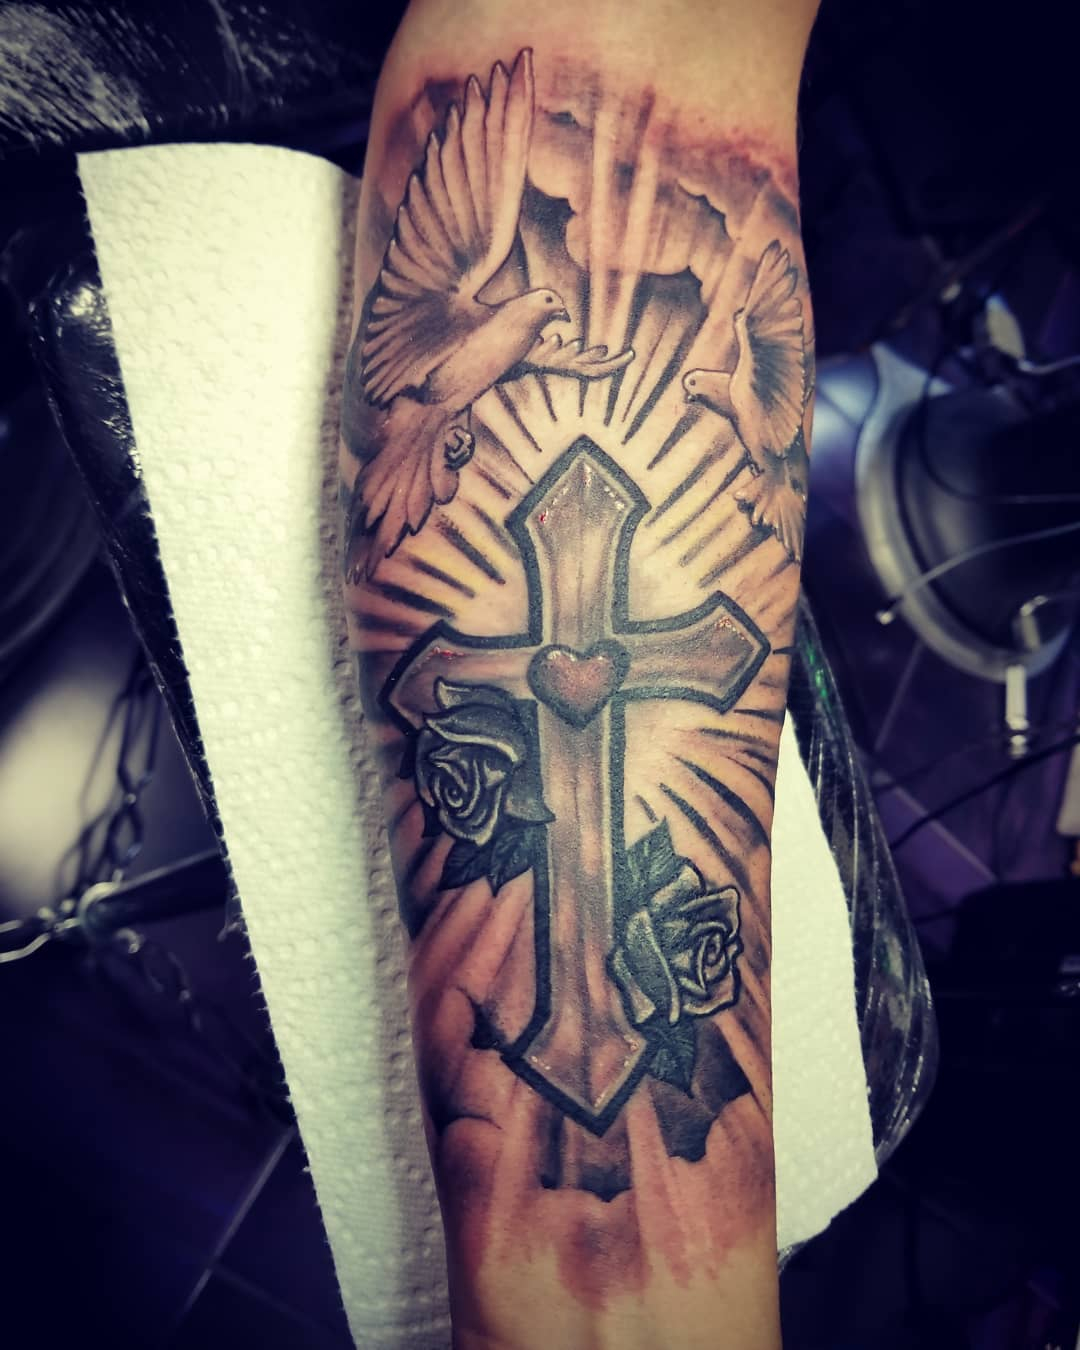 125 Best Cross Tattoos You Can Try Meanings Wild Tattoo Art throughout dimensions 1080 X 1350